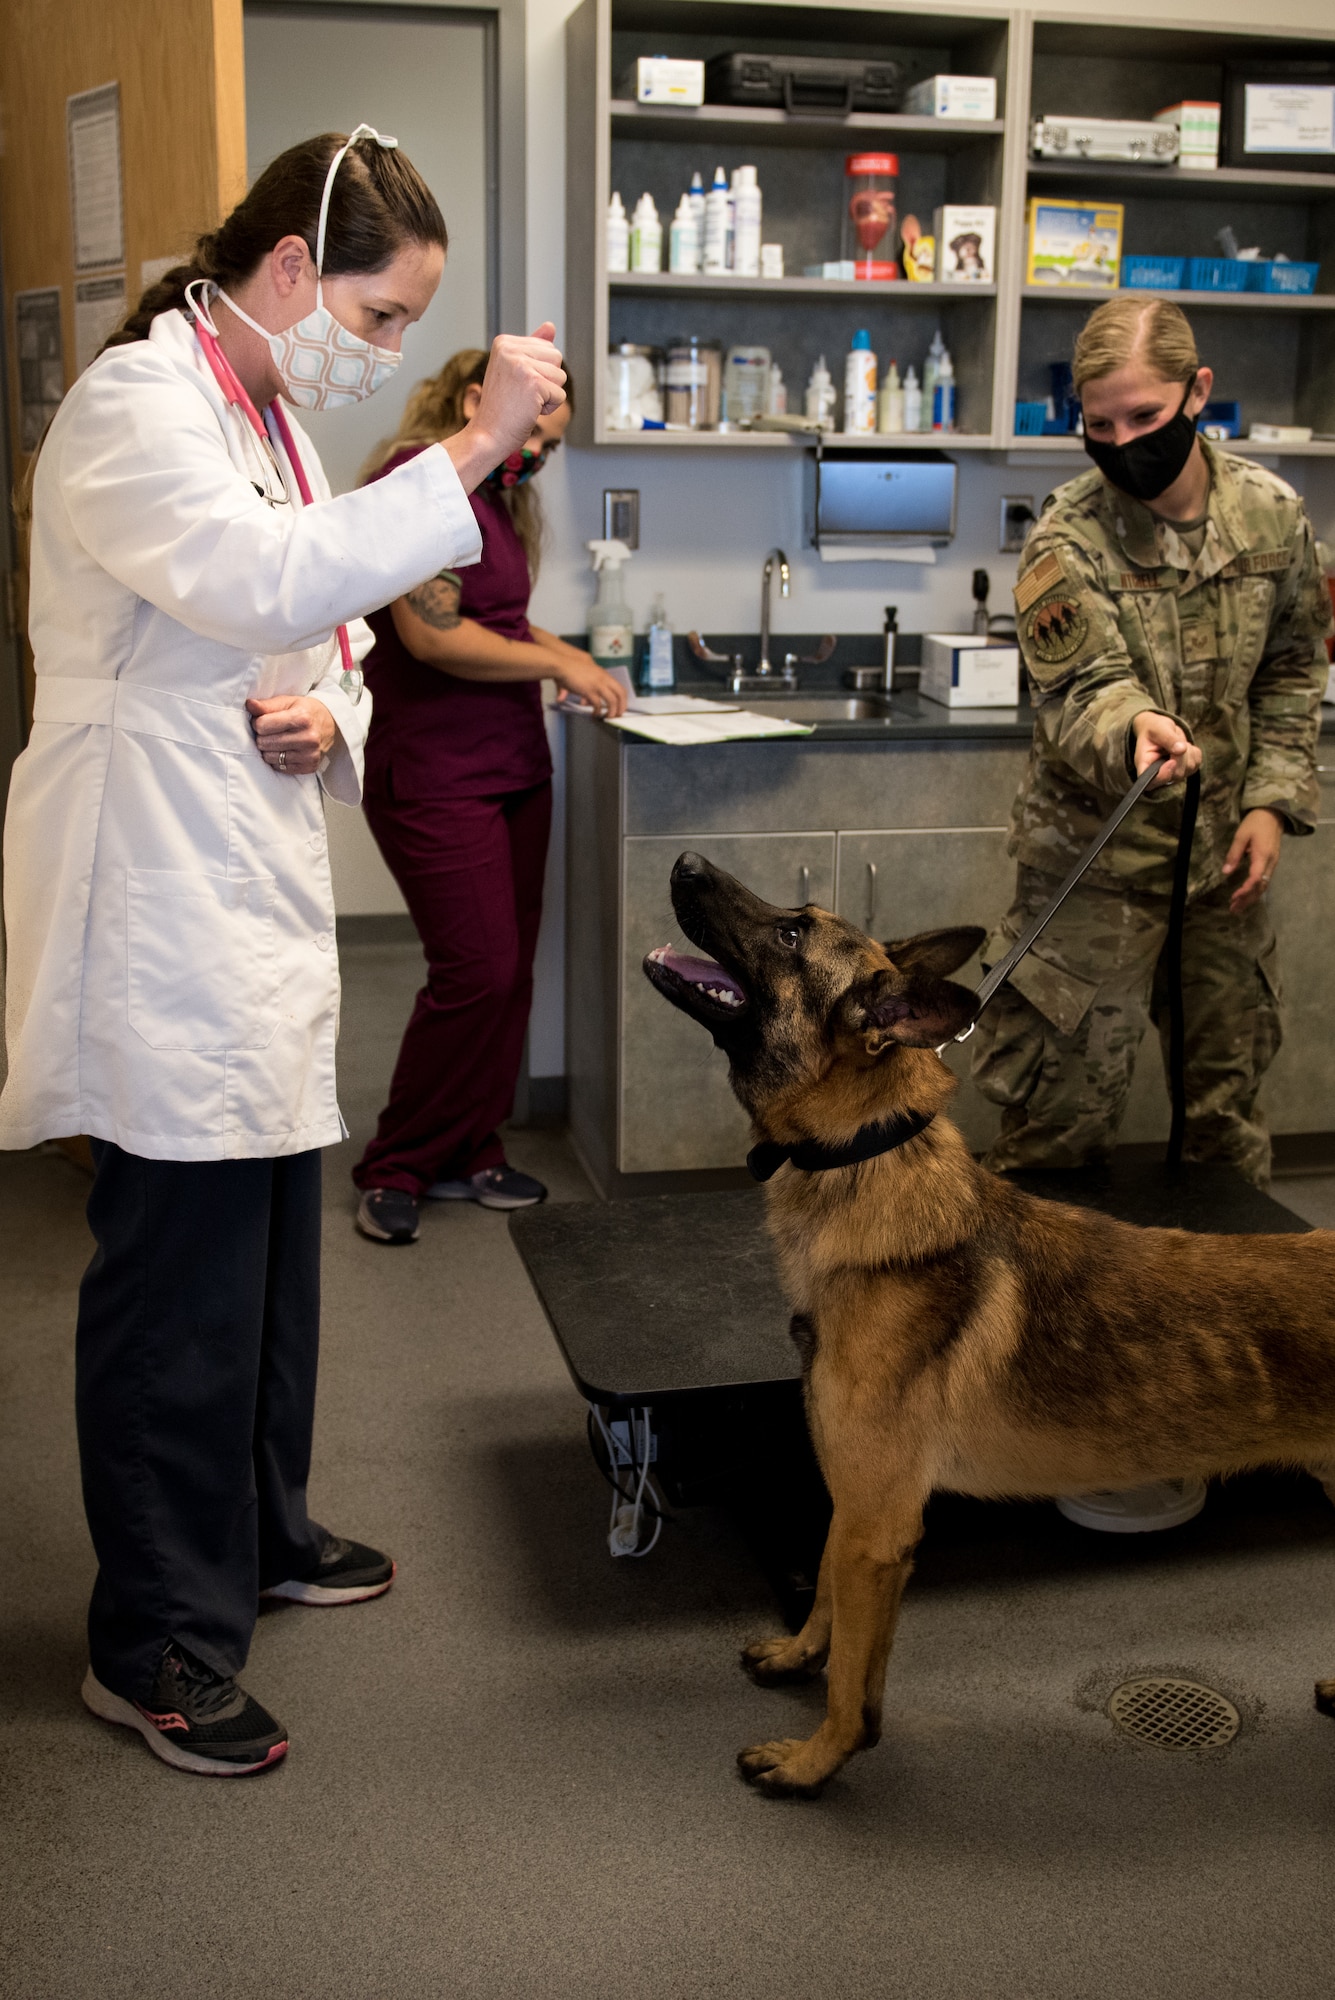 Dr. Joanna Kuecker, a veterinarian assigned to the Whiteman Air Force Base Veterinary Clinic, gives a treat to Military Working Dog Oscar, assigned to the 509th Security Force Squadron, at Whiteman Air Force Base, Missouri, Aug. 7, 2020. Oscar became the newest and youngest MWD for Whiteman AFB after graduating the Military Working Dog Course at Lackland AFB, Texas. Oscar, a two year old Belgian Malinois, arrived to WAFB Aug.7. (U.S. Air Force photo by Airman 1st Class Christina Carter)